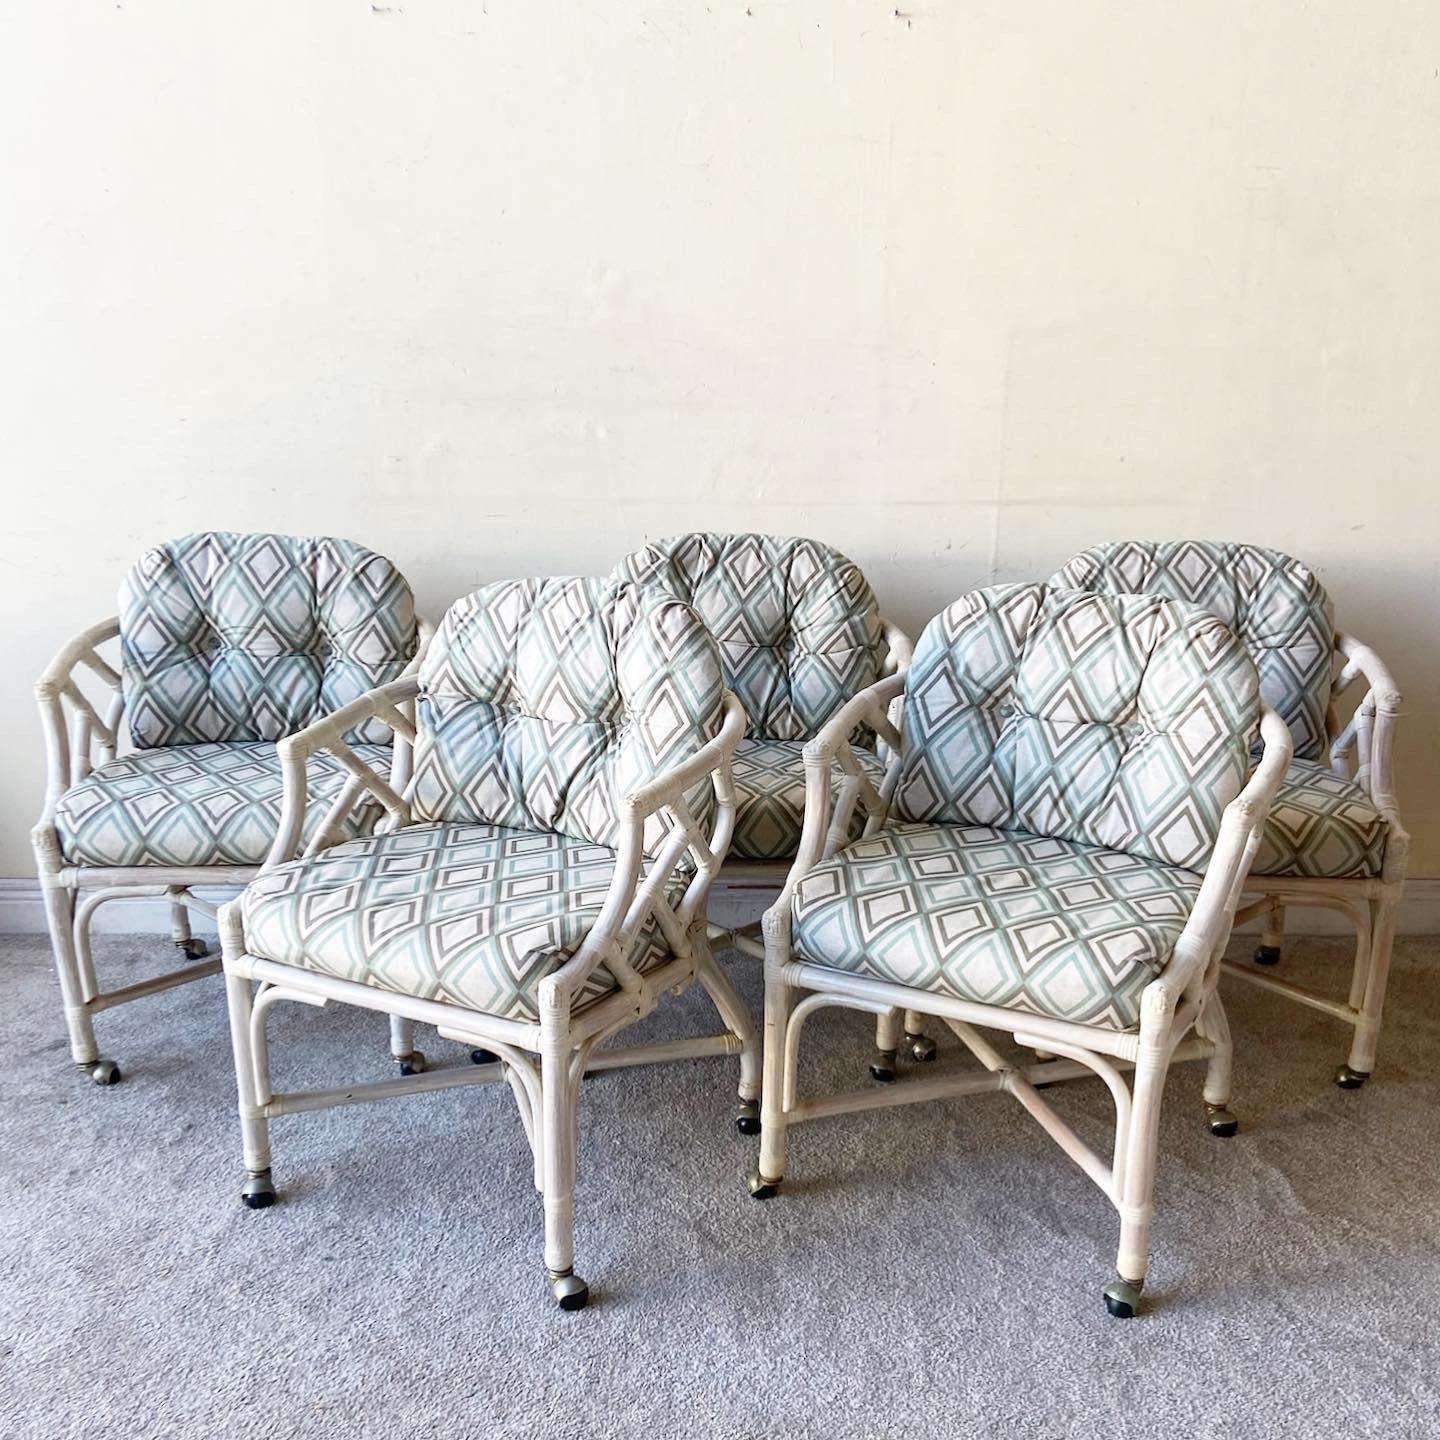 Amazing set of 5 boho chic bamboo rattan chairs by Henry Link. Features a wonderful chippendale frame with upholstered cushions.

Seat height is 19.0 in